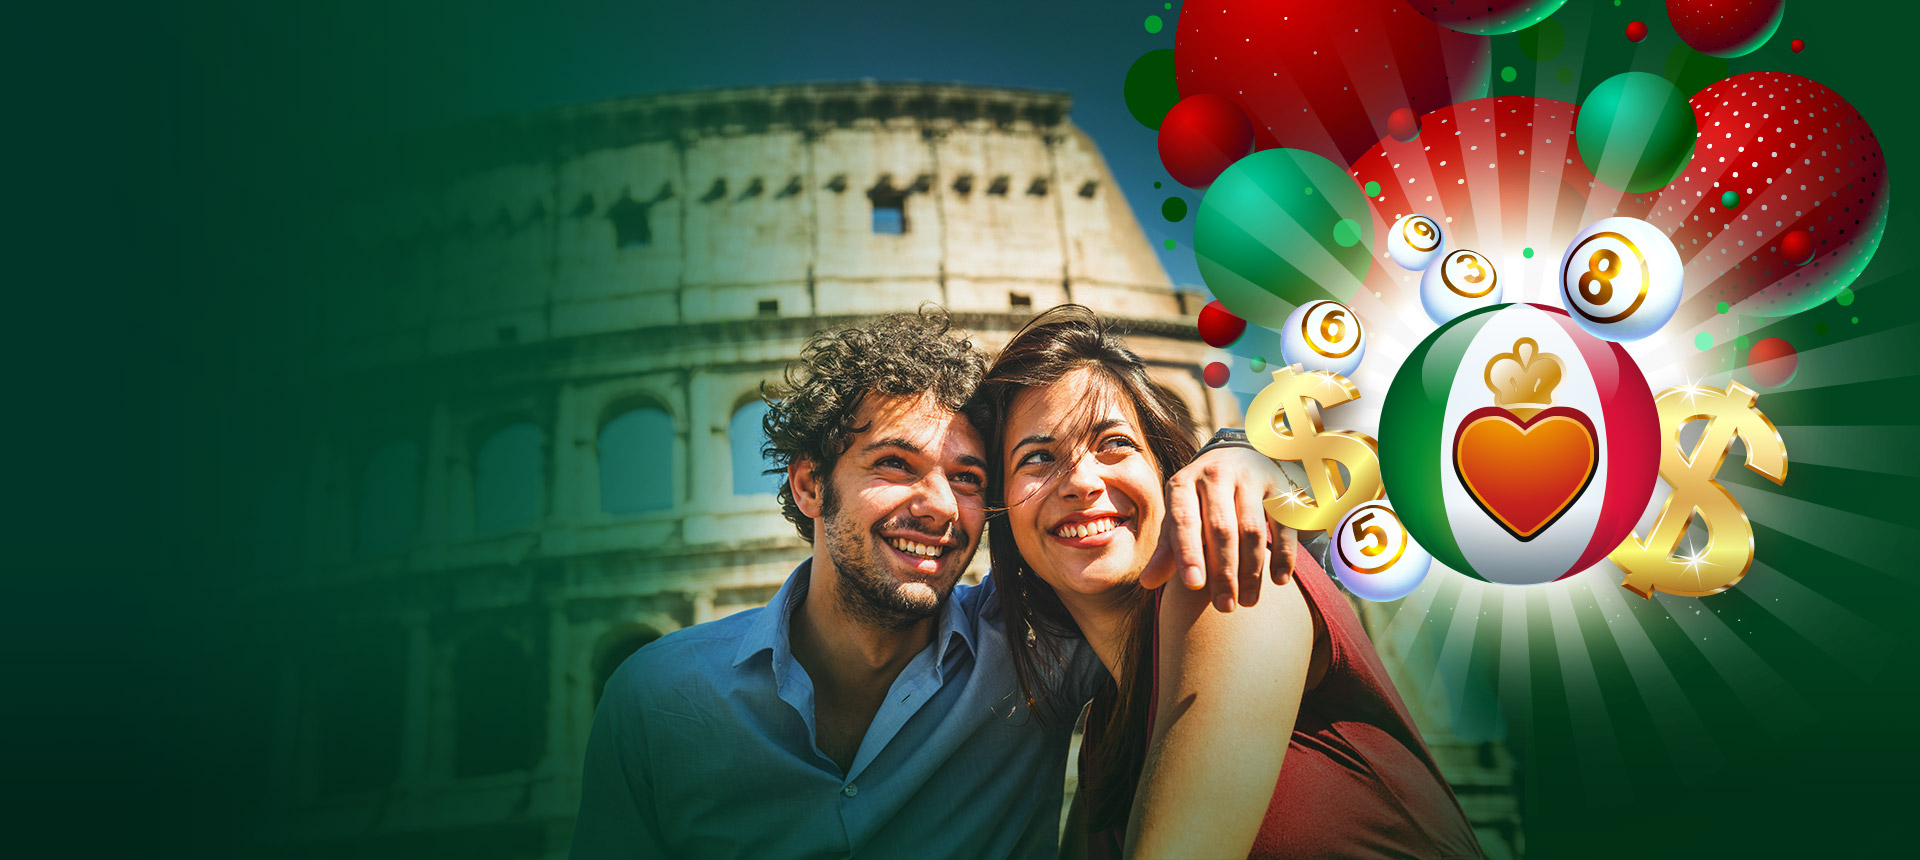 We bring you Italy's best lottery! €281 MILLION JACKPOT! Play SuperEnalotto now!